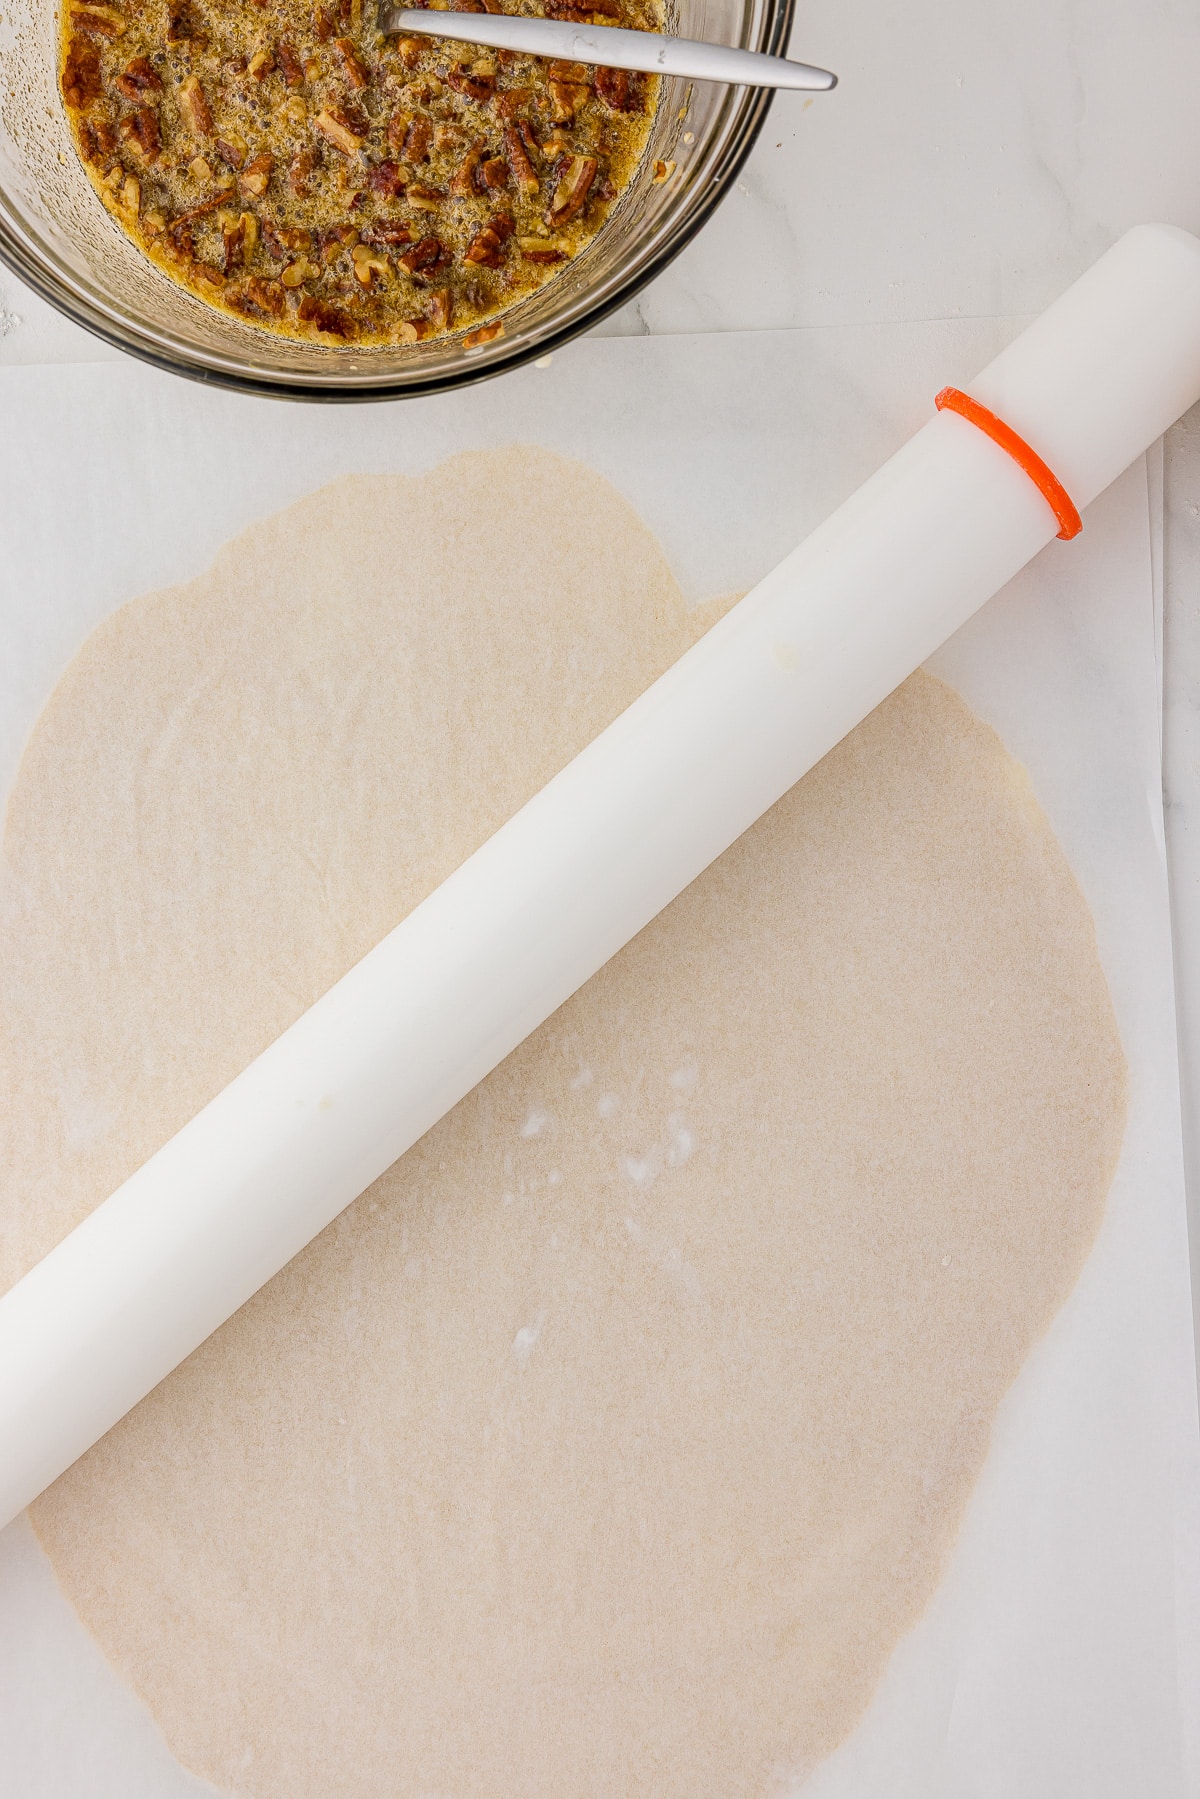 Wilton fondant rolling pin on a parchment sheet with dough inside.